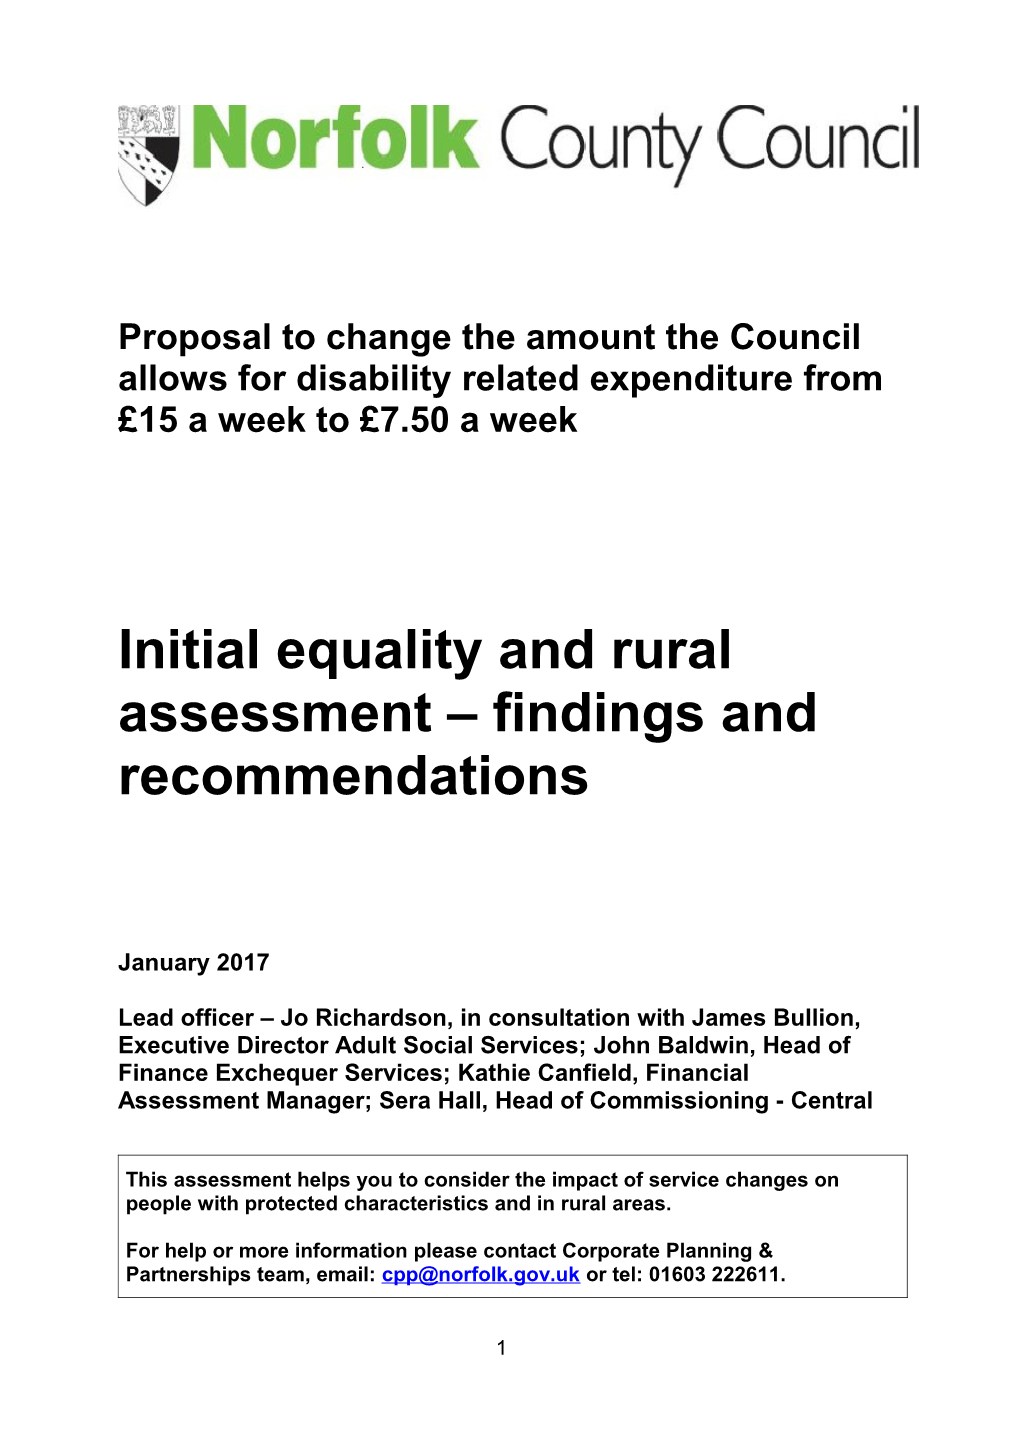 Initial Equality and Rural Assessment Findings and Recommendations